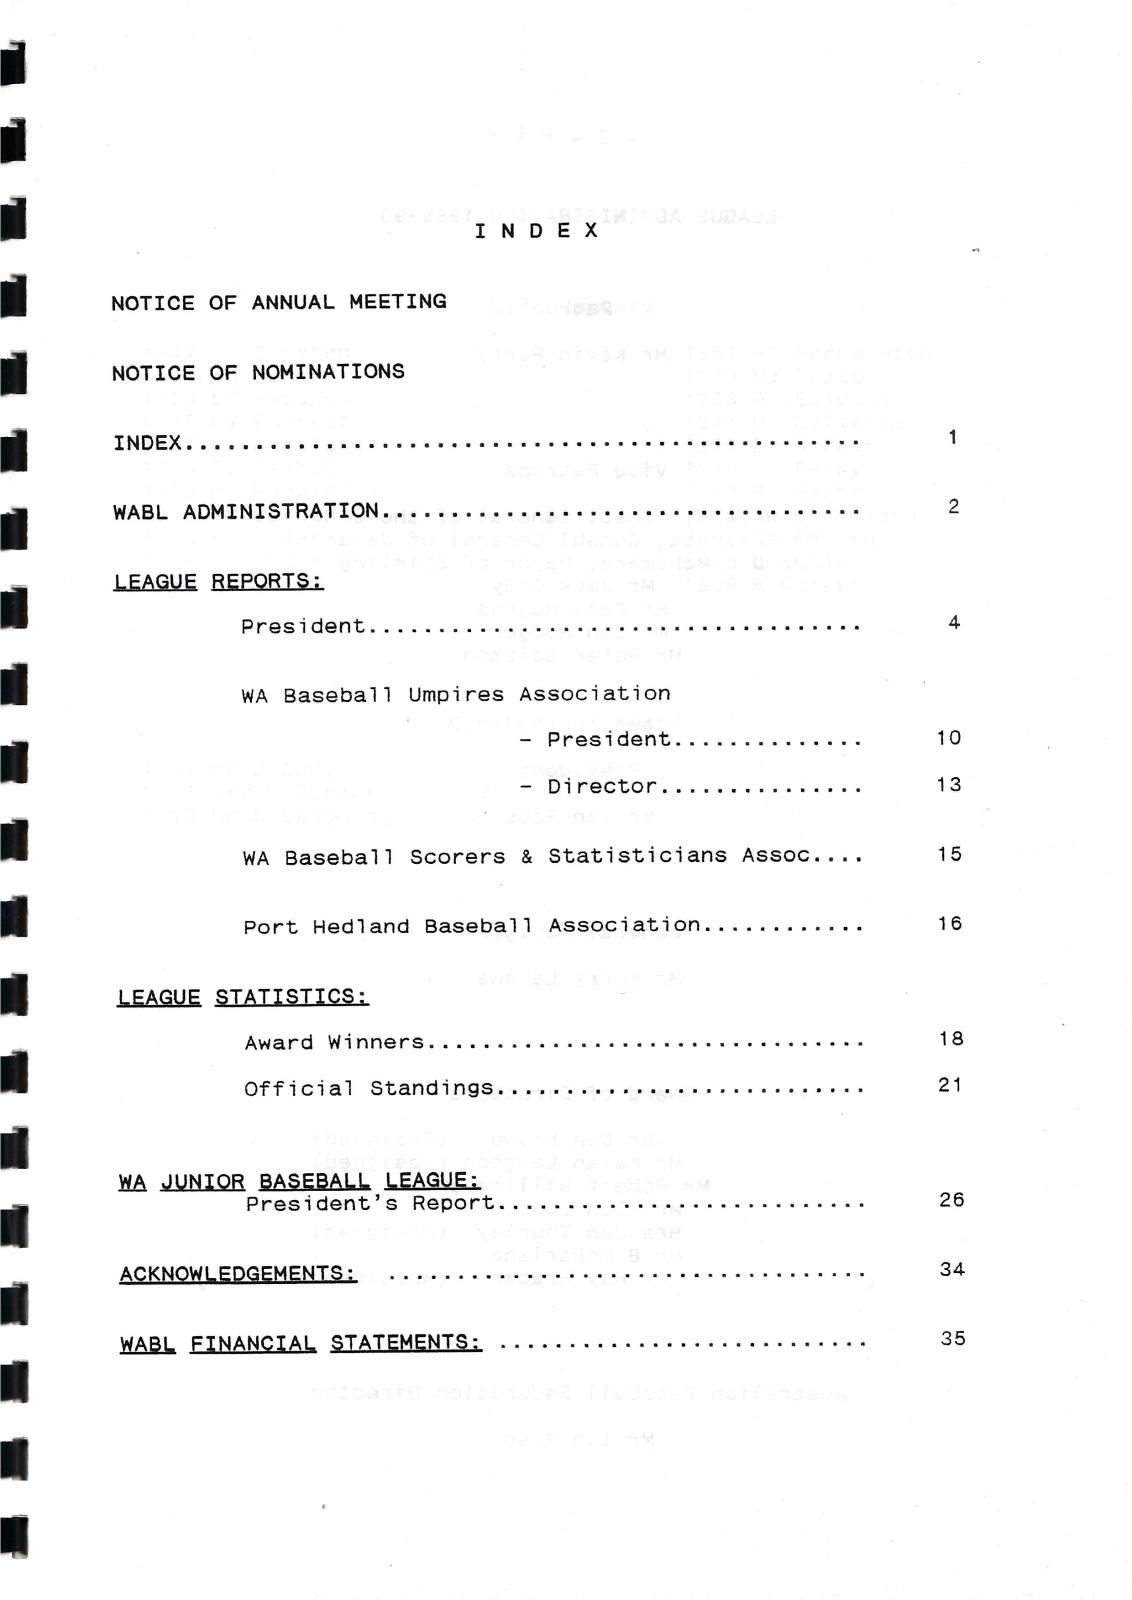 West Australian Baseball League 55th Annual Report 1989-90 index page